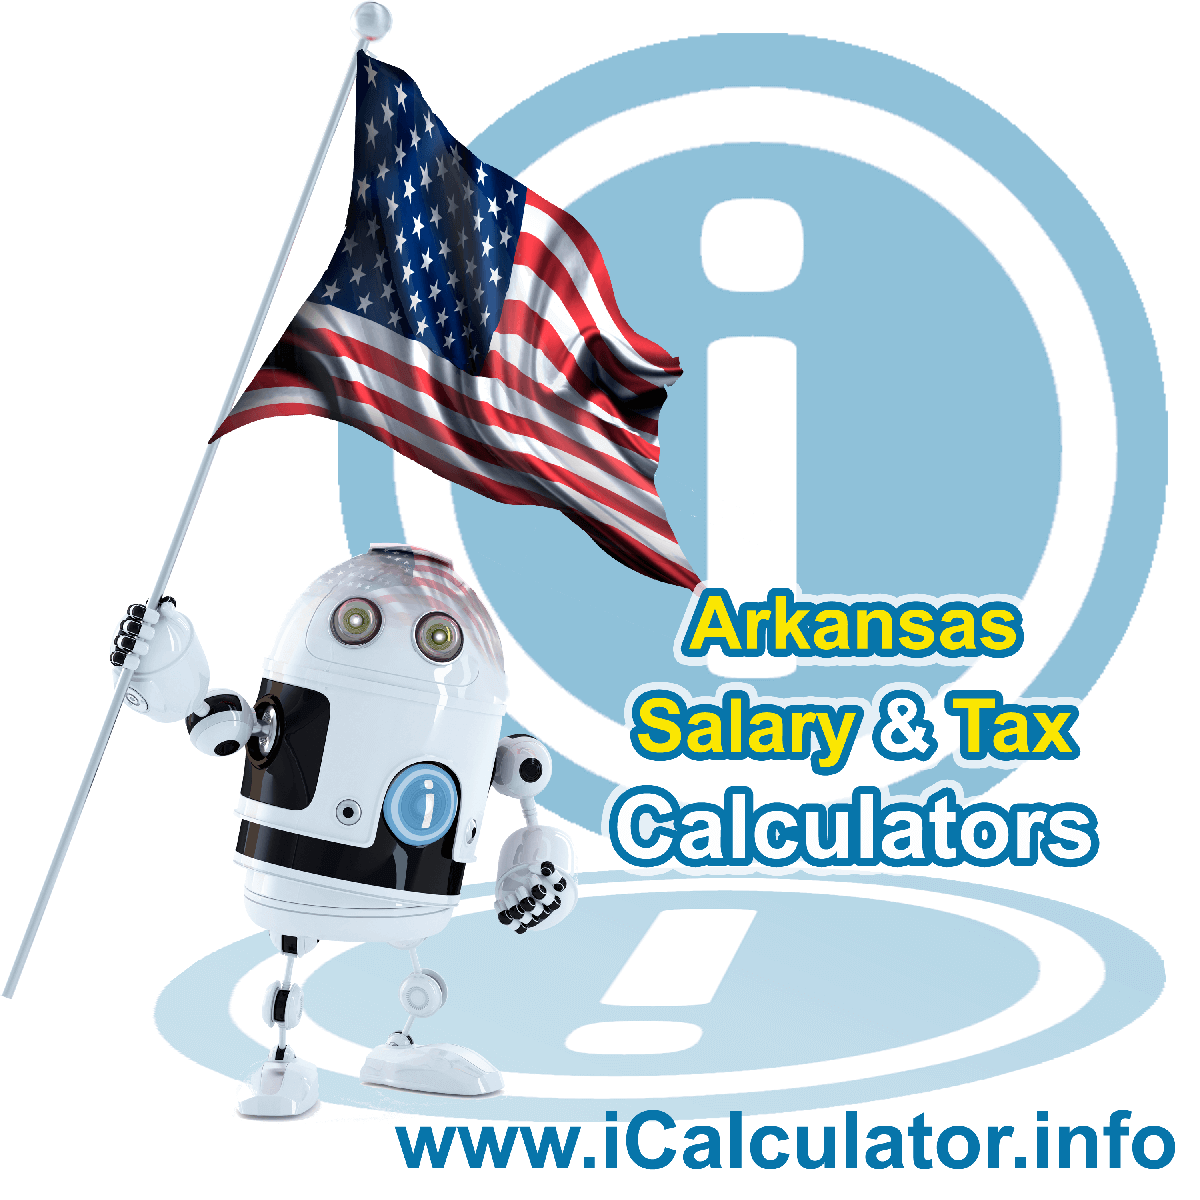 Arkansas Salary Calculator 2022 | iCalculator™ | The Arkansas Salary Calculator allows you to quickly calculate your salary after tax including Arkansas State Tax, Federal State Tax, Medicare Deductions, Social Security, Capital Gains and other income tax and salary deductions complete with supporting Arkansas state tax tables 